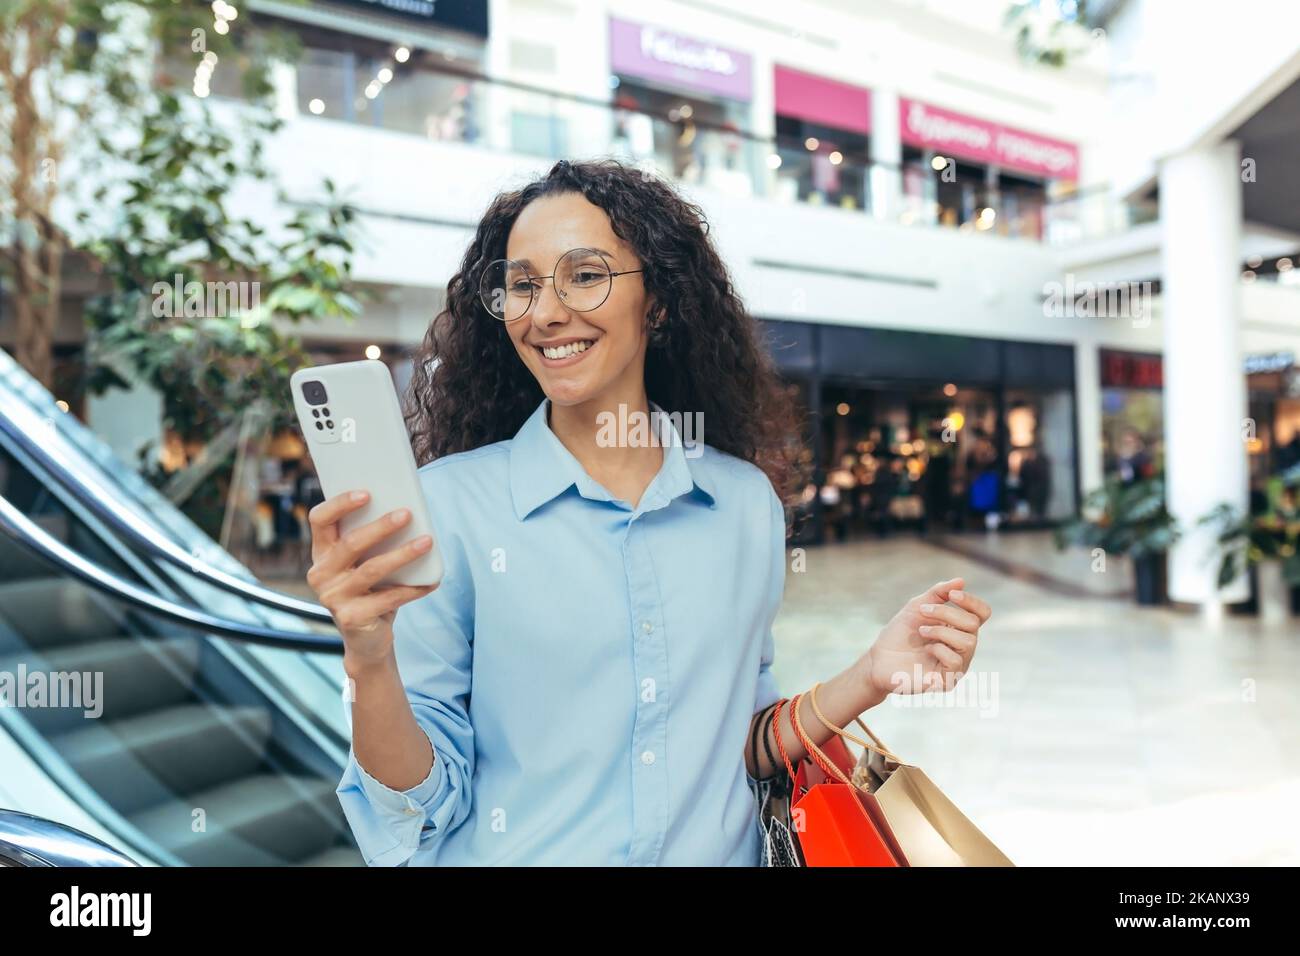 Happy hispanic woman in supermarket shopping, reading online message, holding colorful shopping bags and smartphone. Stock Photo